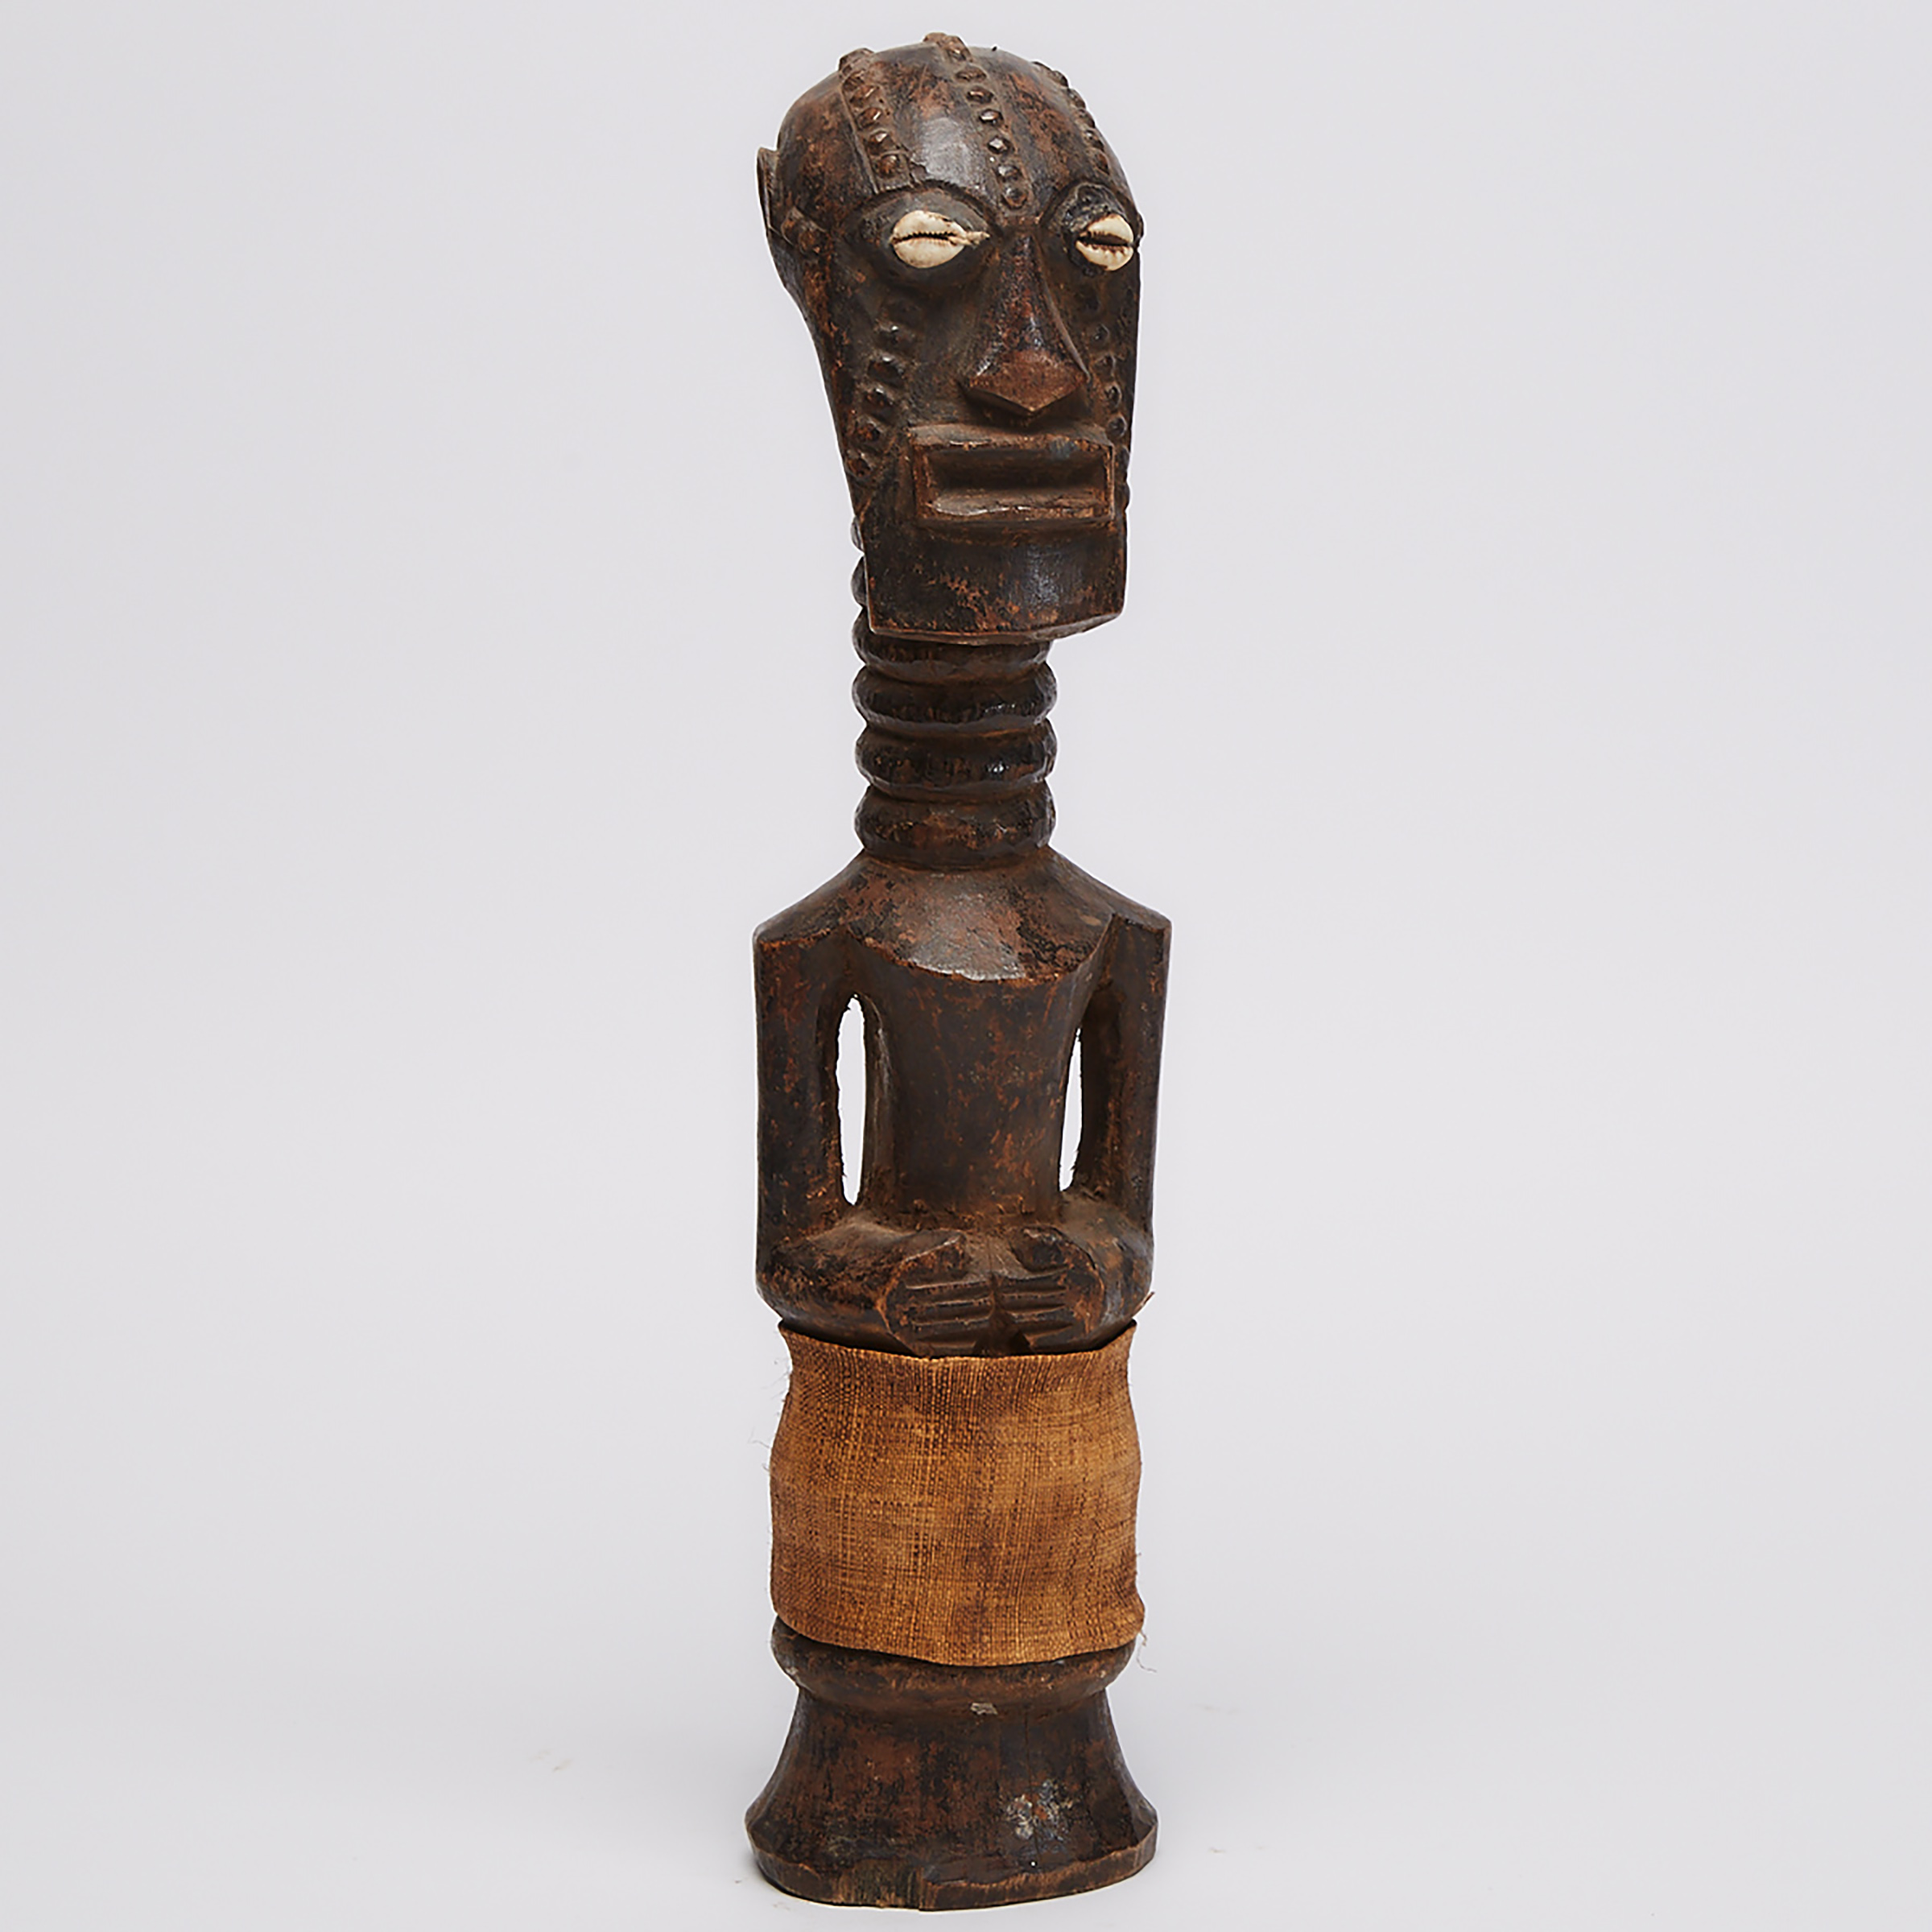 Songye Figure, Democratic Republic of Africa, Central Africa